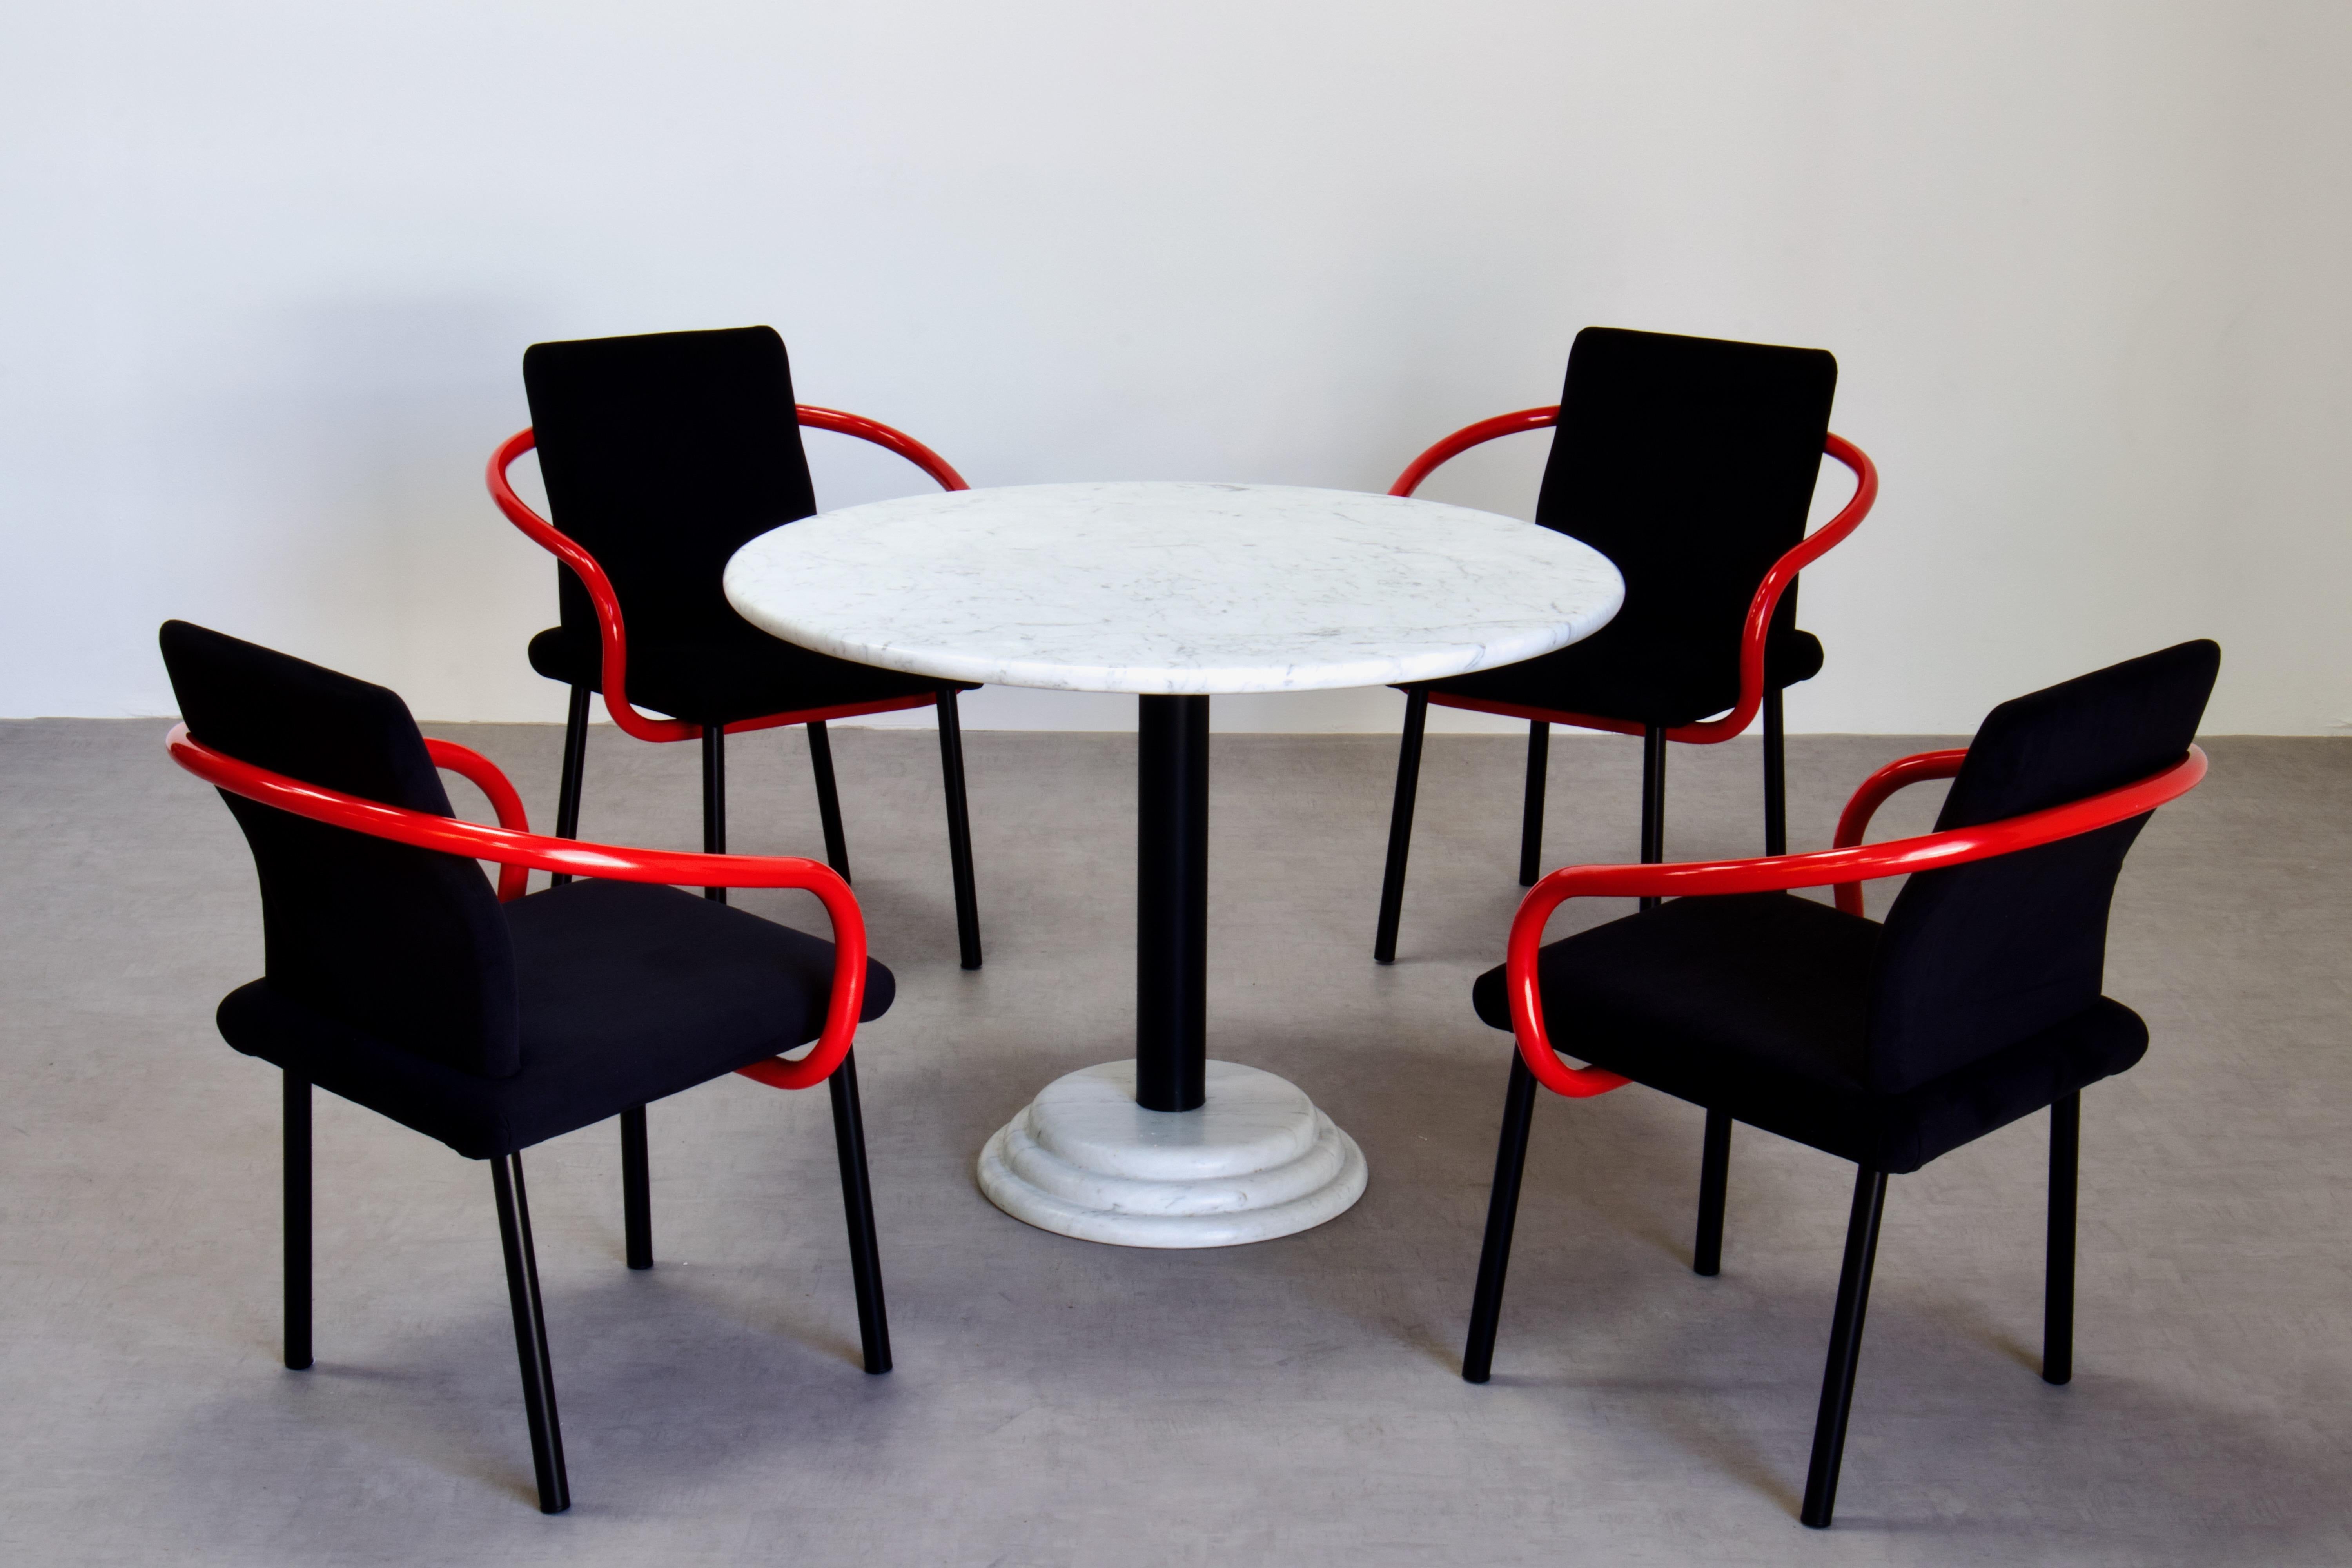 Icon of the Memphis Milano Movement. A set of four Ettore Sottsass Mandarin chairs for Knoll. Black Alcantara upholstery. Arms in red lacquer. Additionally, a Carrara marble round pedestal dining table attributed to Ettore Sottsass.

A 1986 design